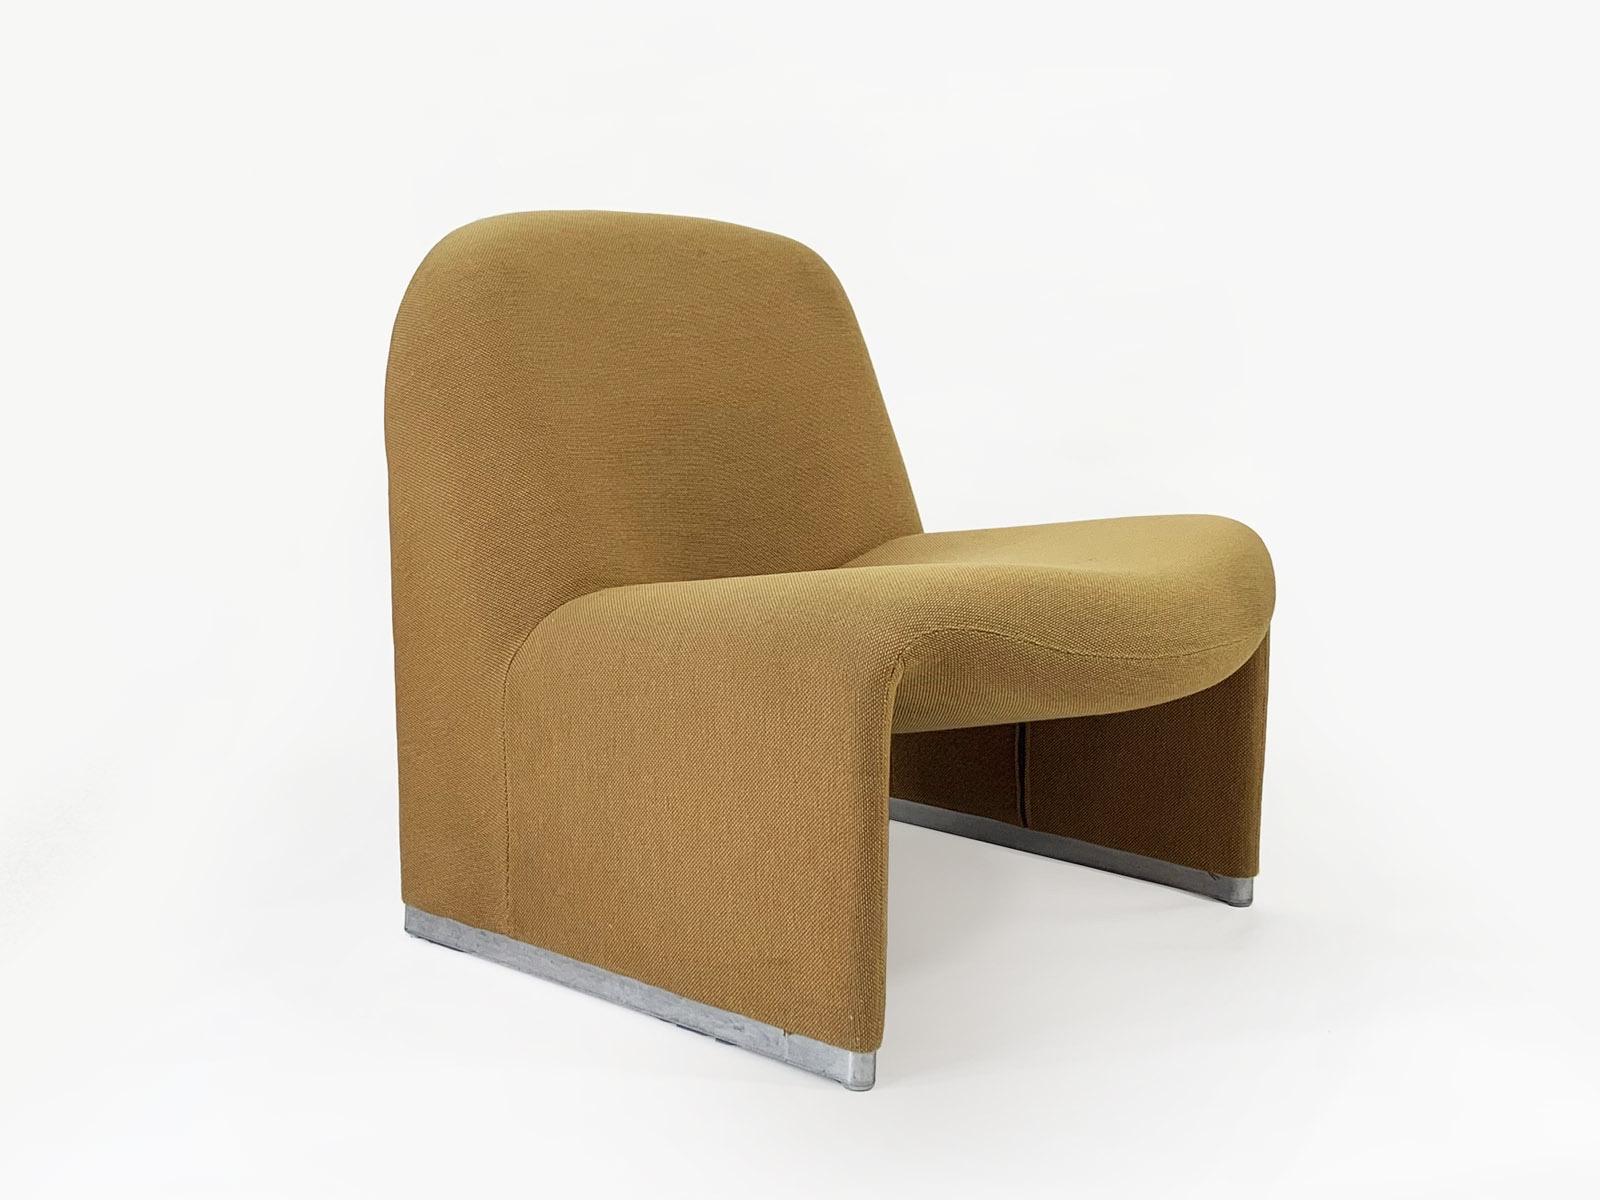 Iconic Alky chair designed by Giancarlo Piretti for Anonima Castelli (this one is produced by Artifort Holand)
Foam interior on steel construction, upholstered in yellow fabric. 
The foam is in pristine condition, the upholstery has some spots,